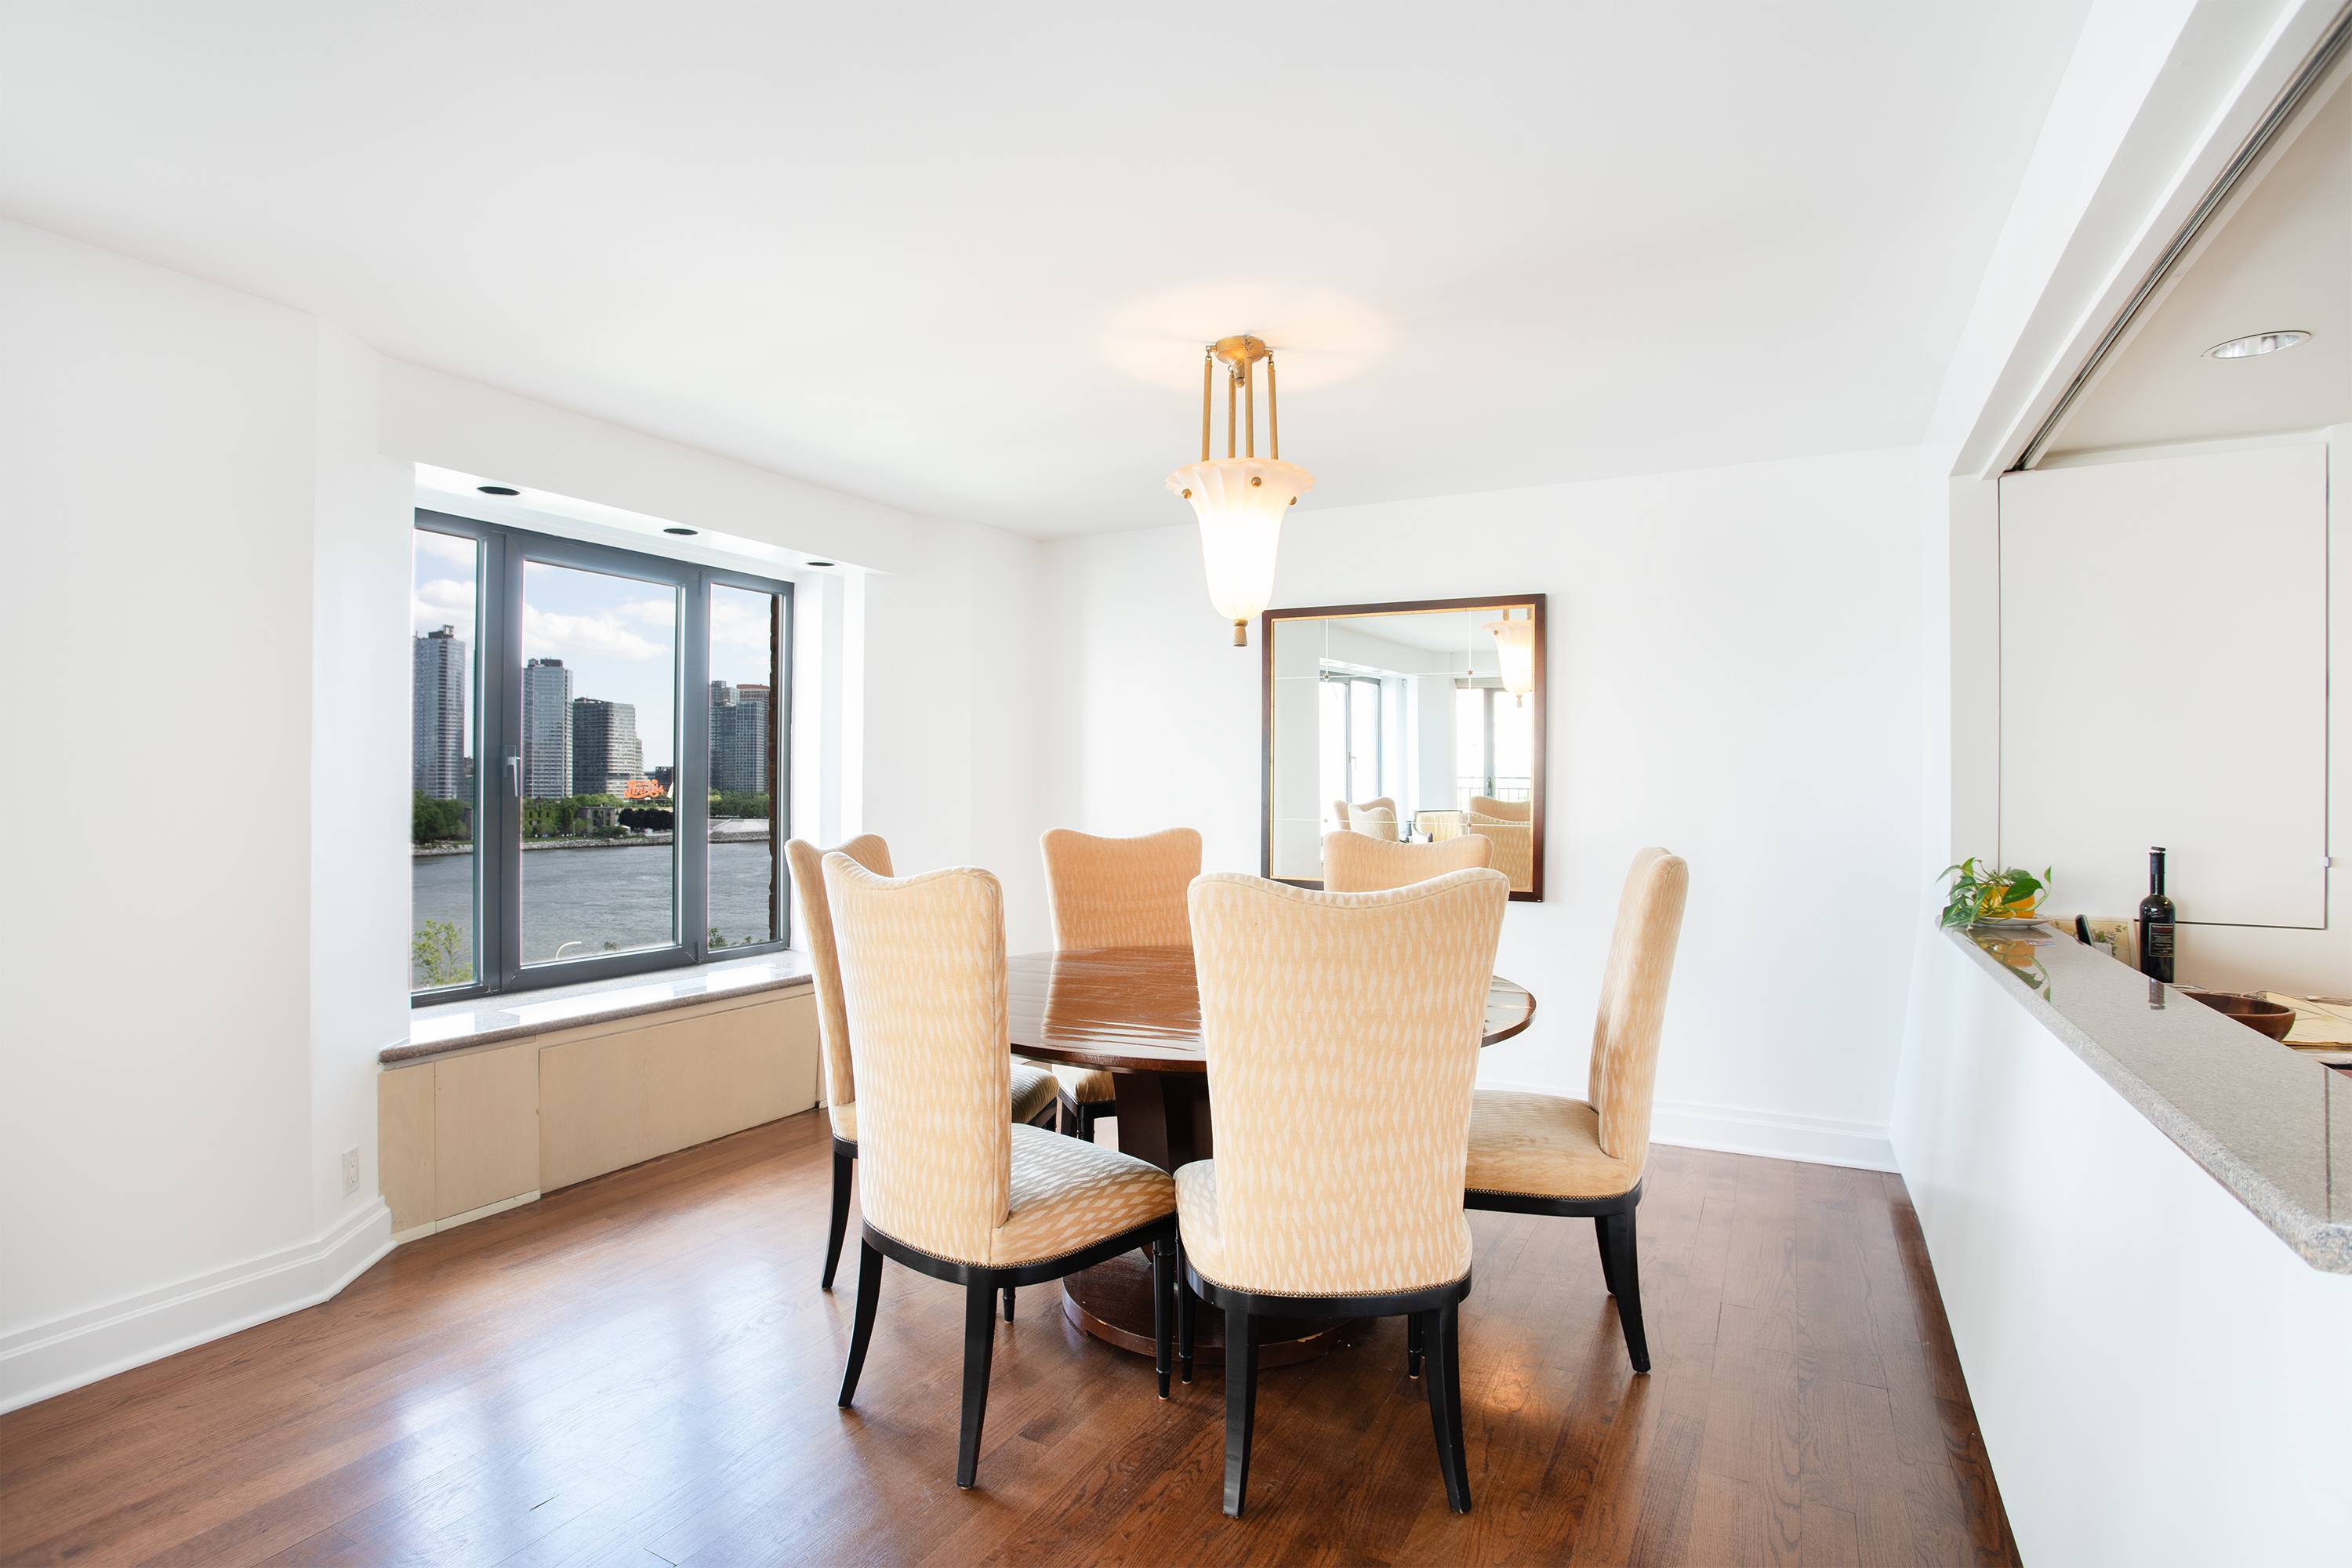 60 Sutton Place South is a distinguished full service building situated on Manhattan s East River.